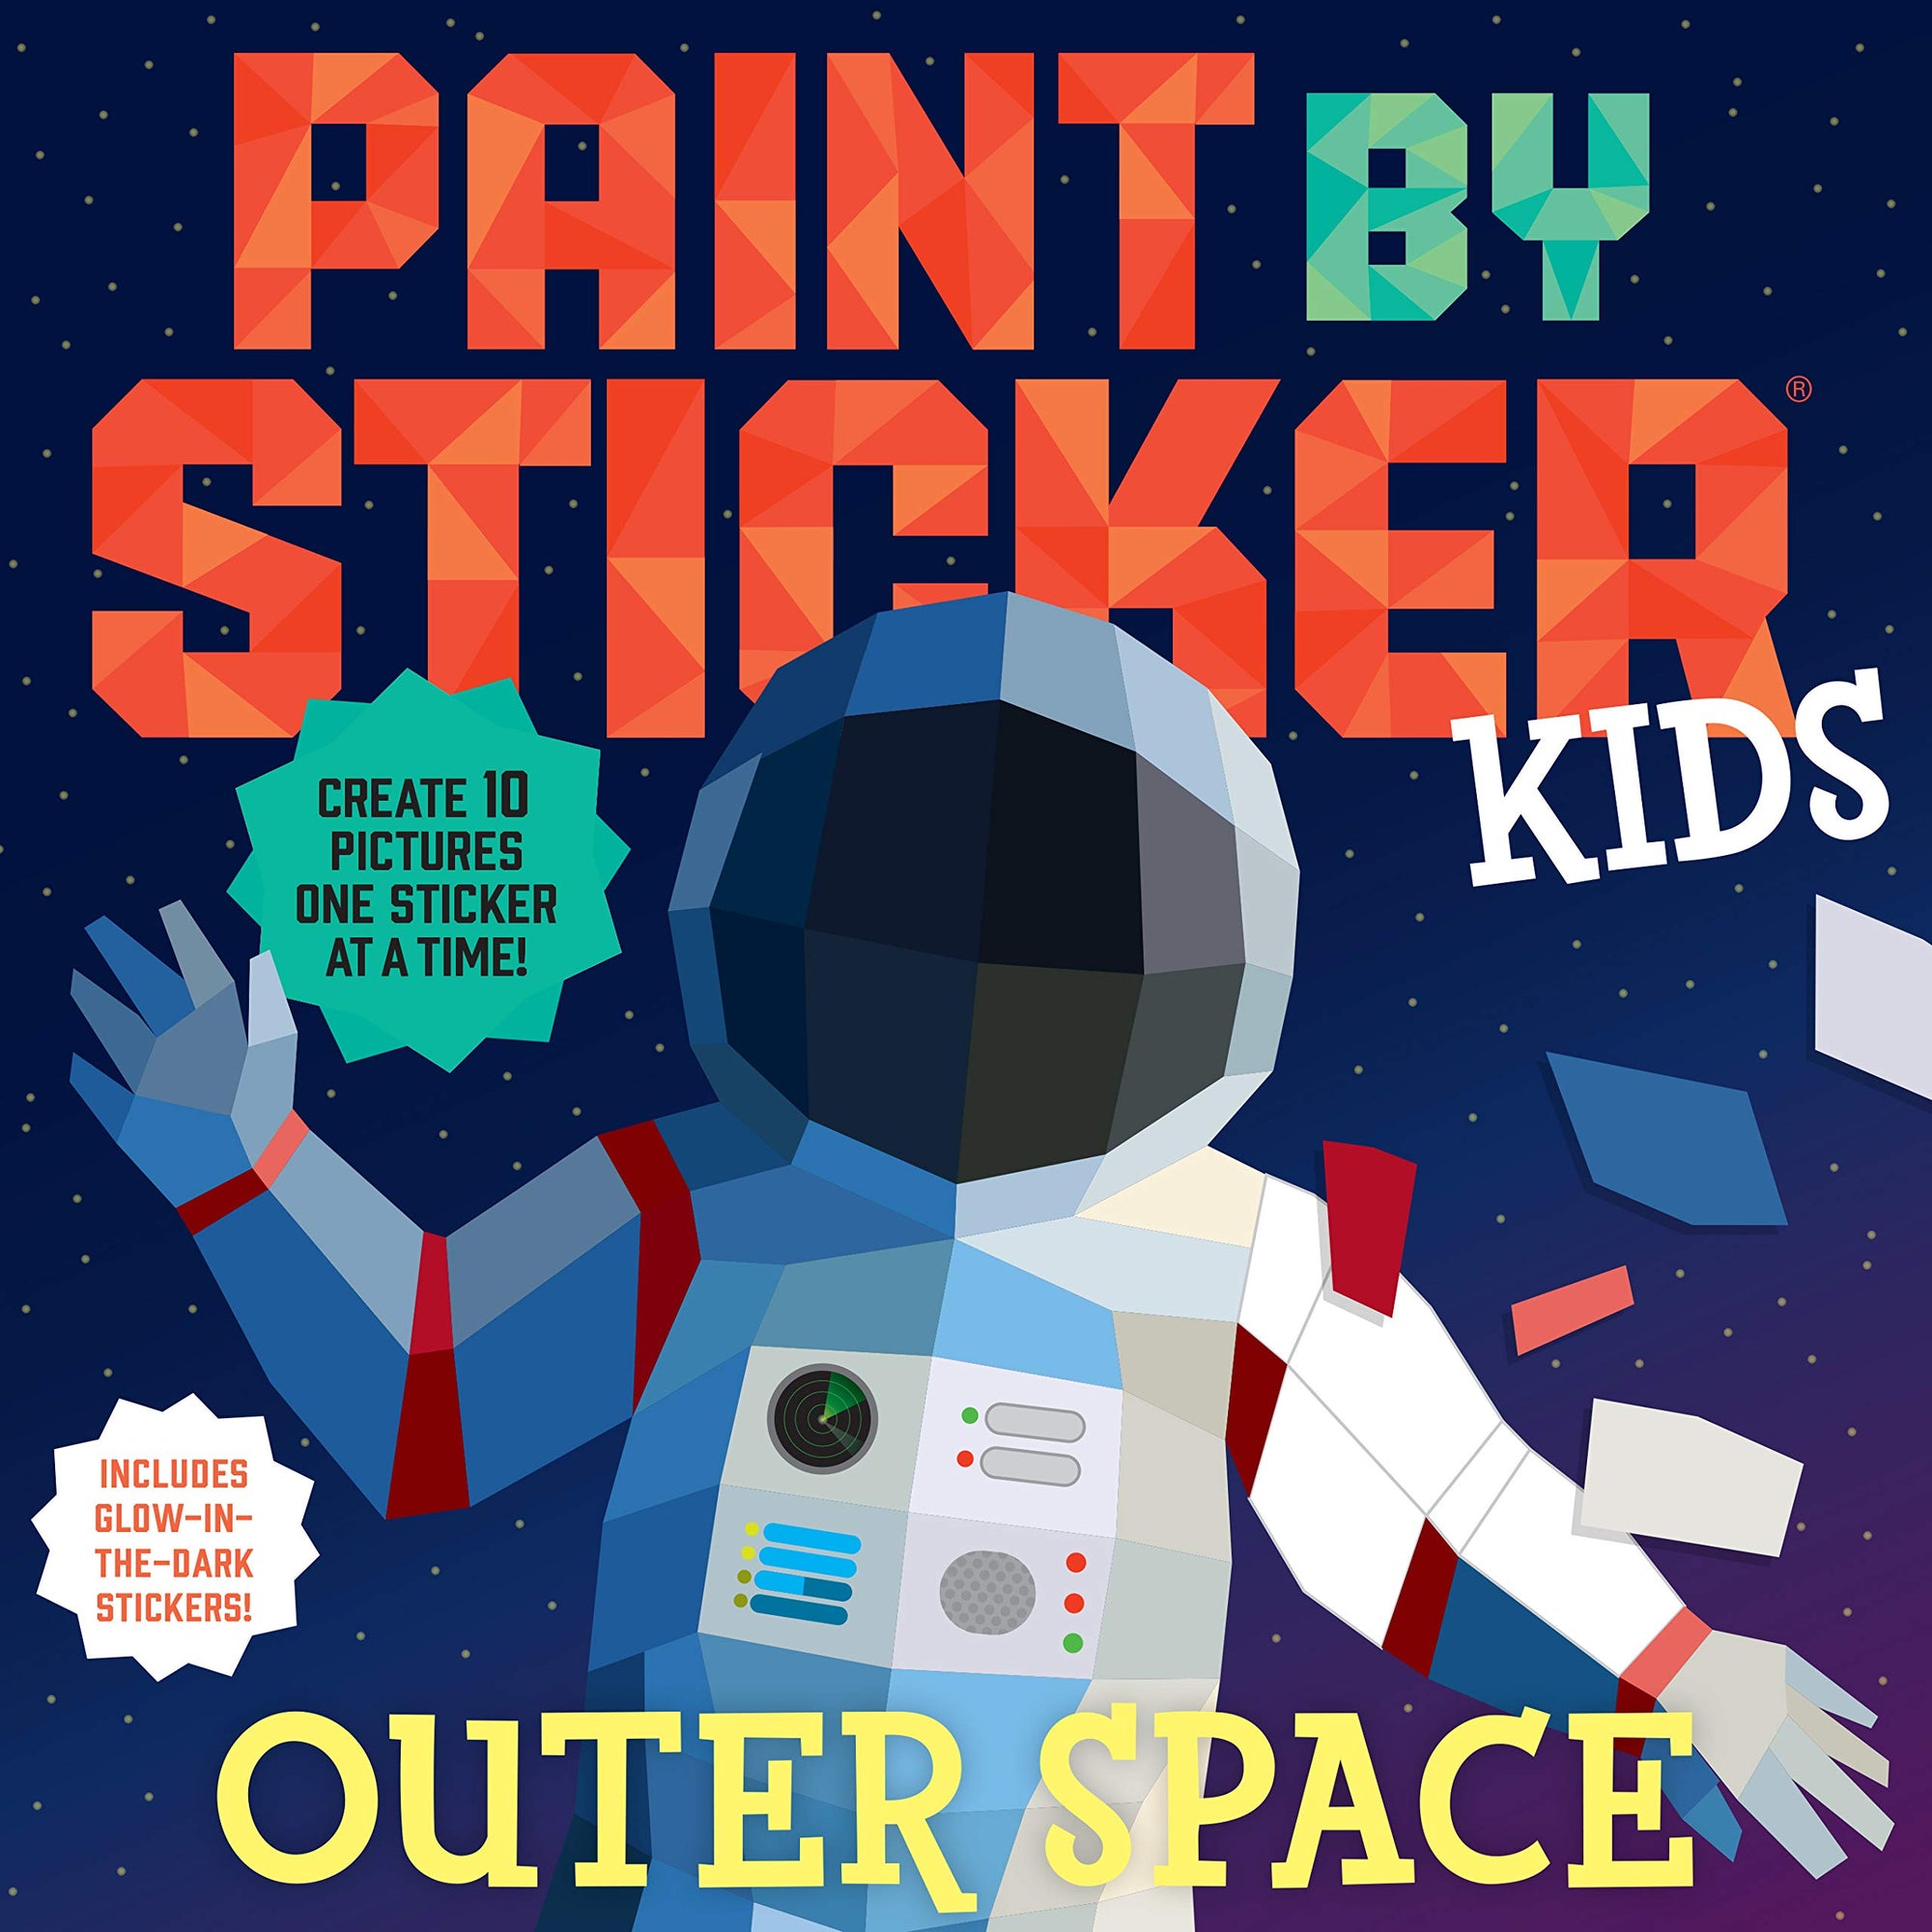 Paint by Sticker Kids: Outer Space